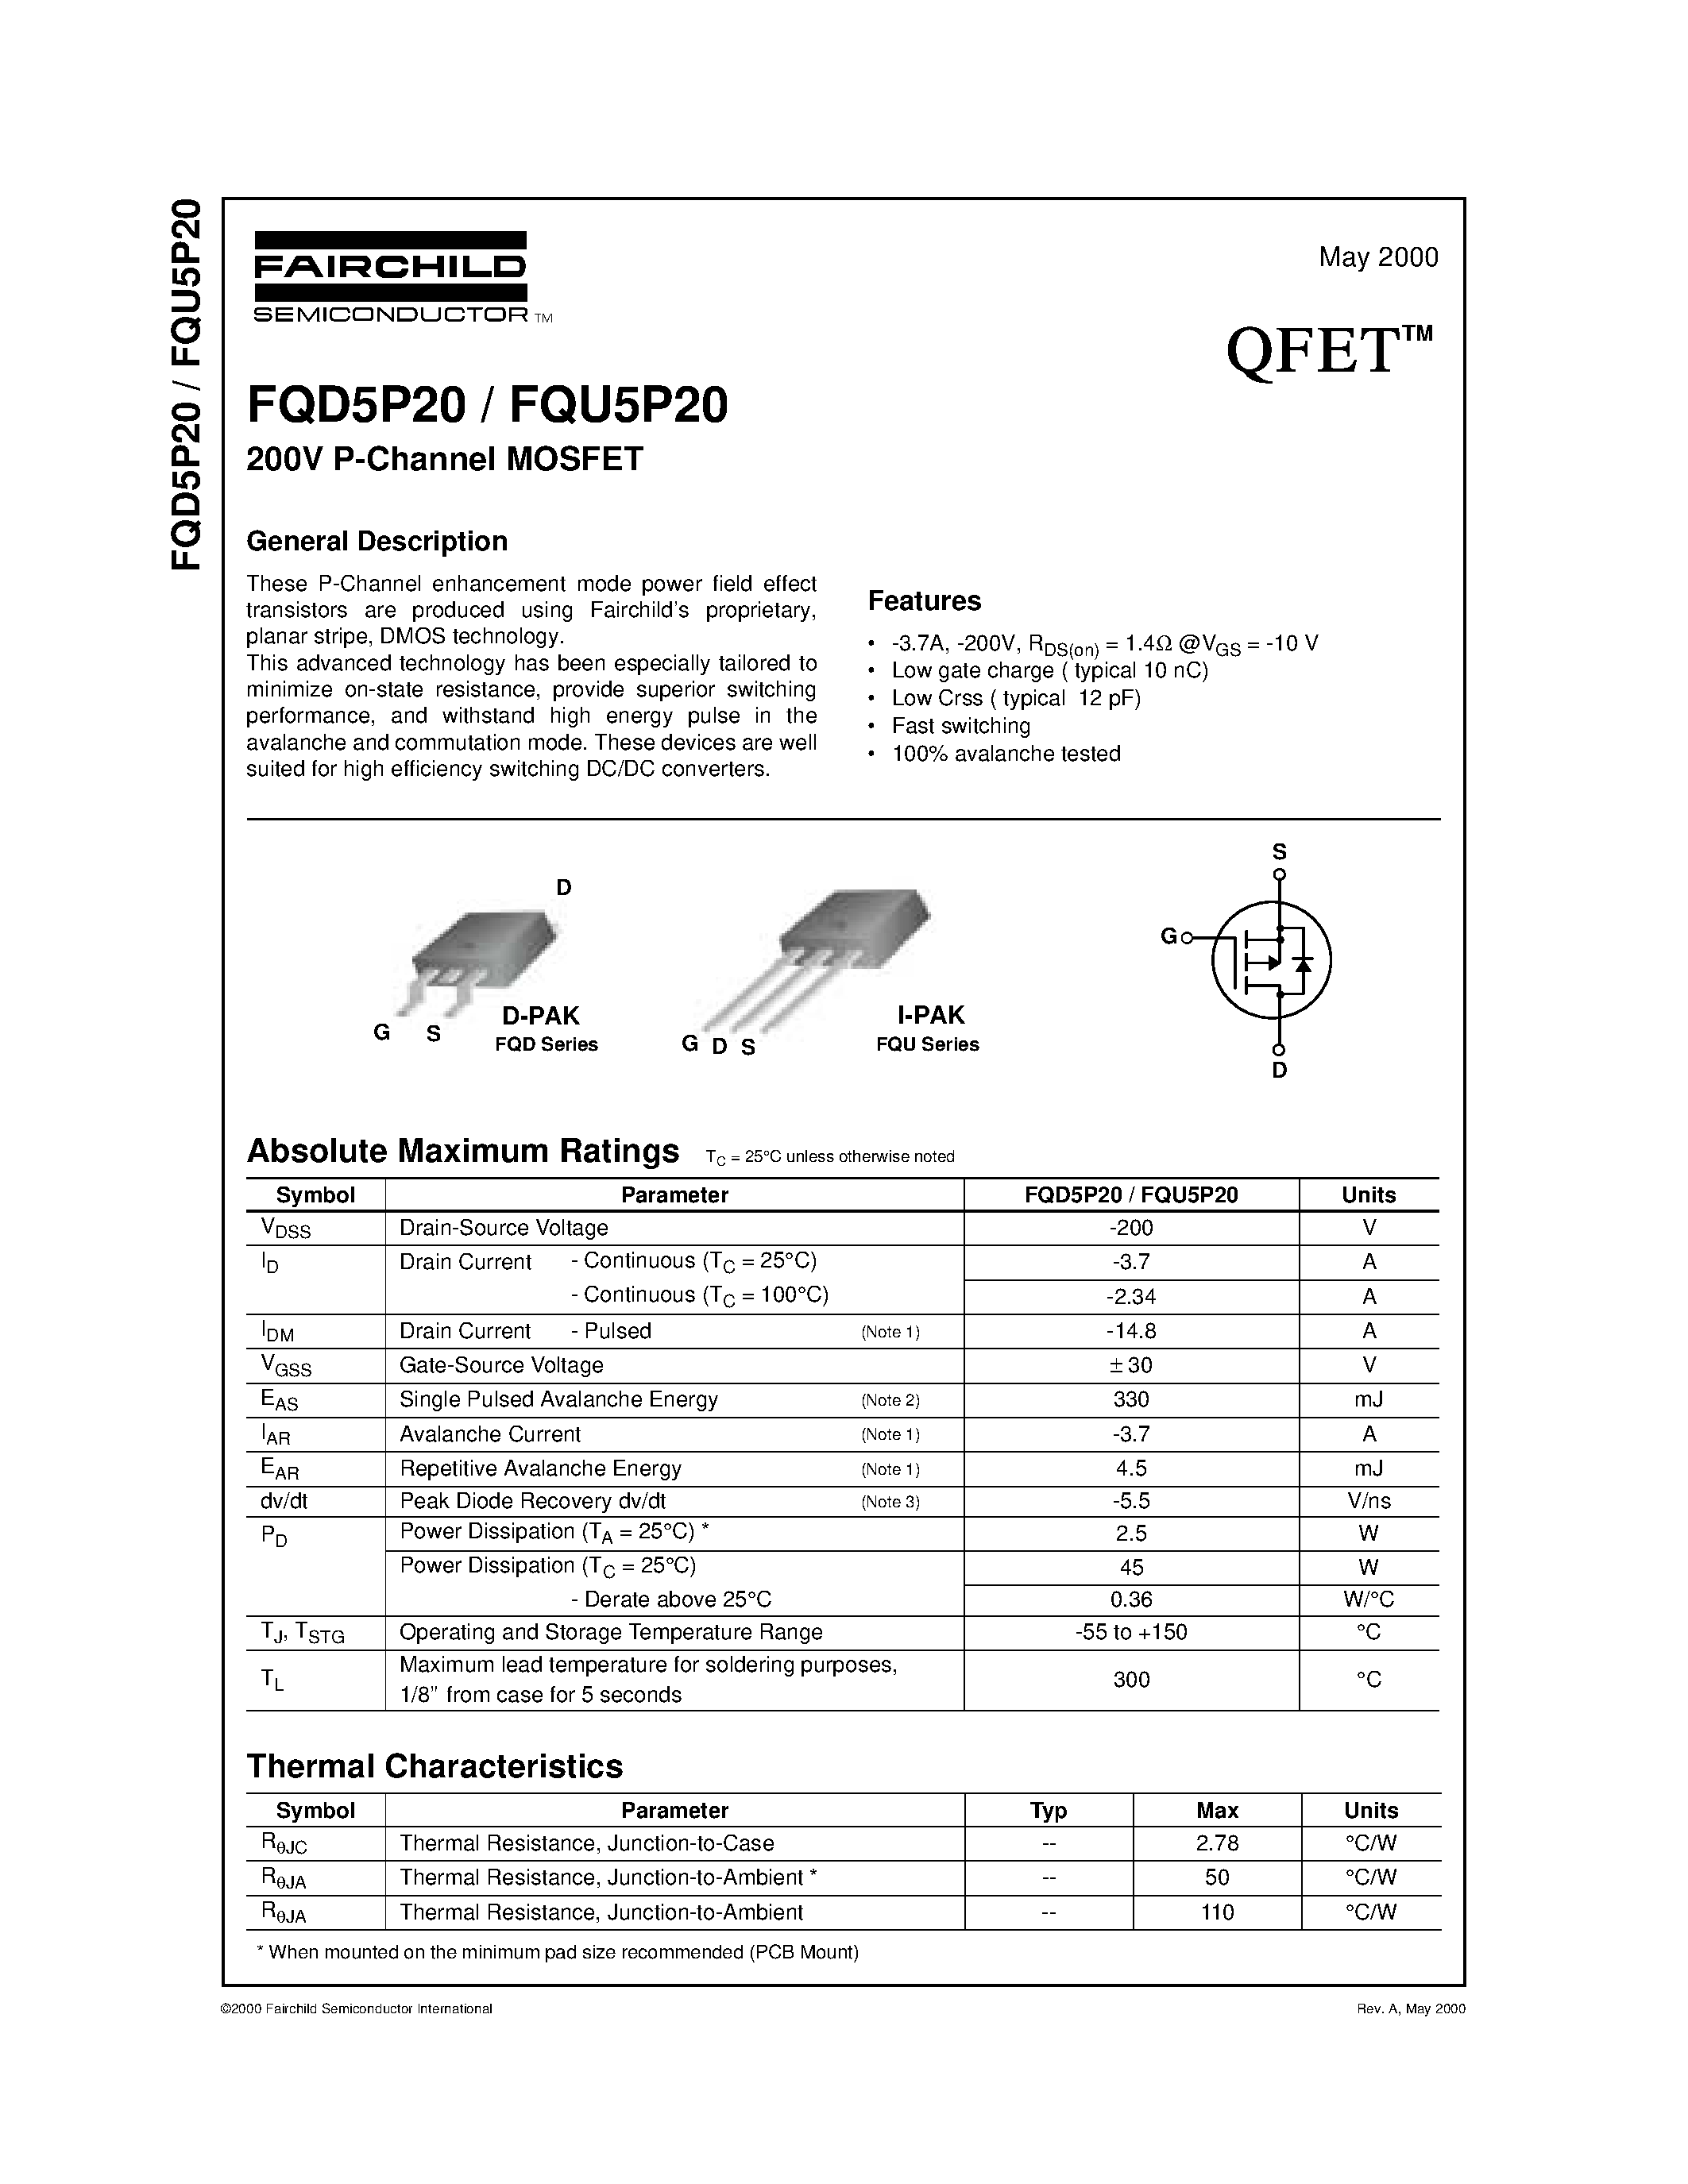 Datasheet FQD5P20 - 200V P-Channel MOSFET page 1